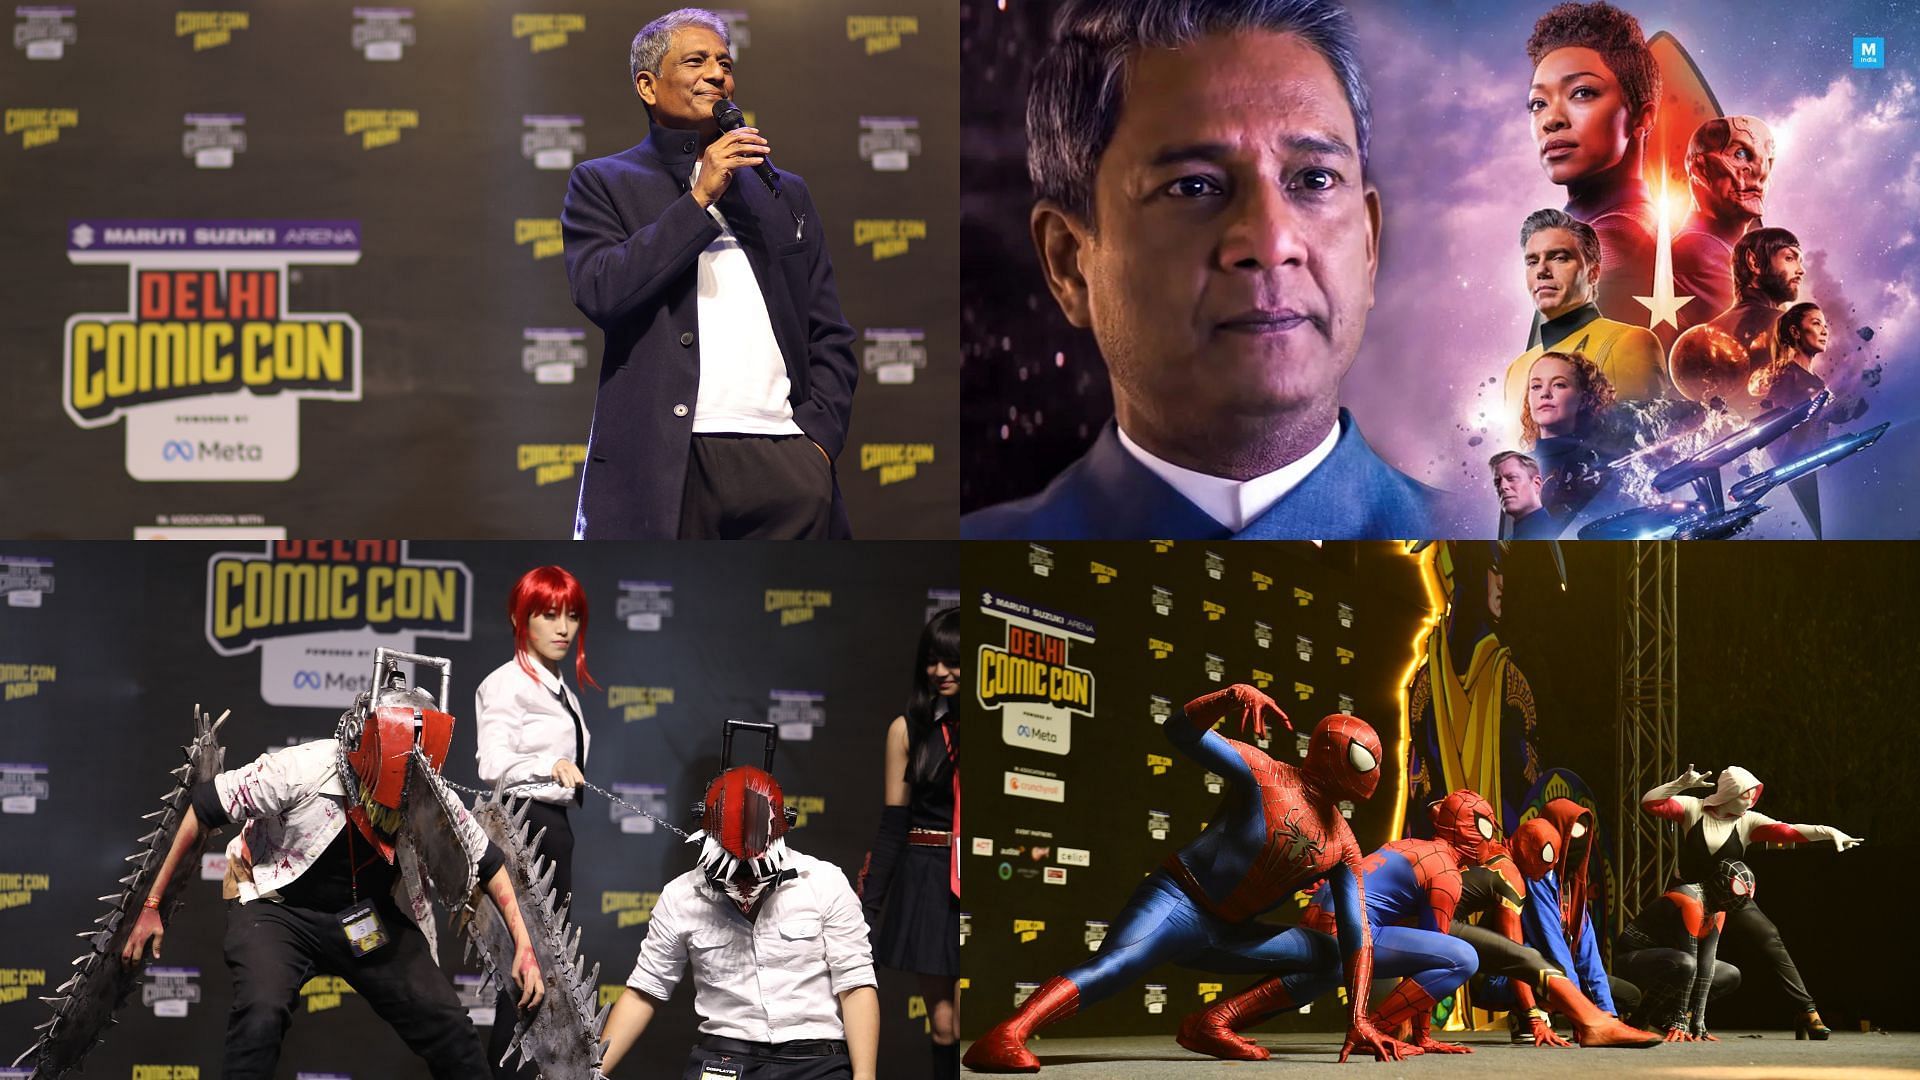 Actor Adil Hussain about his role on Star Trek: Discovery, Delhi Comic Con 2022 experience (Image via Sportskeeda)